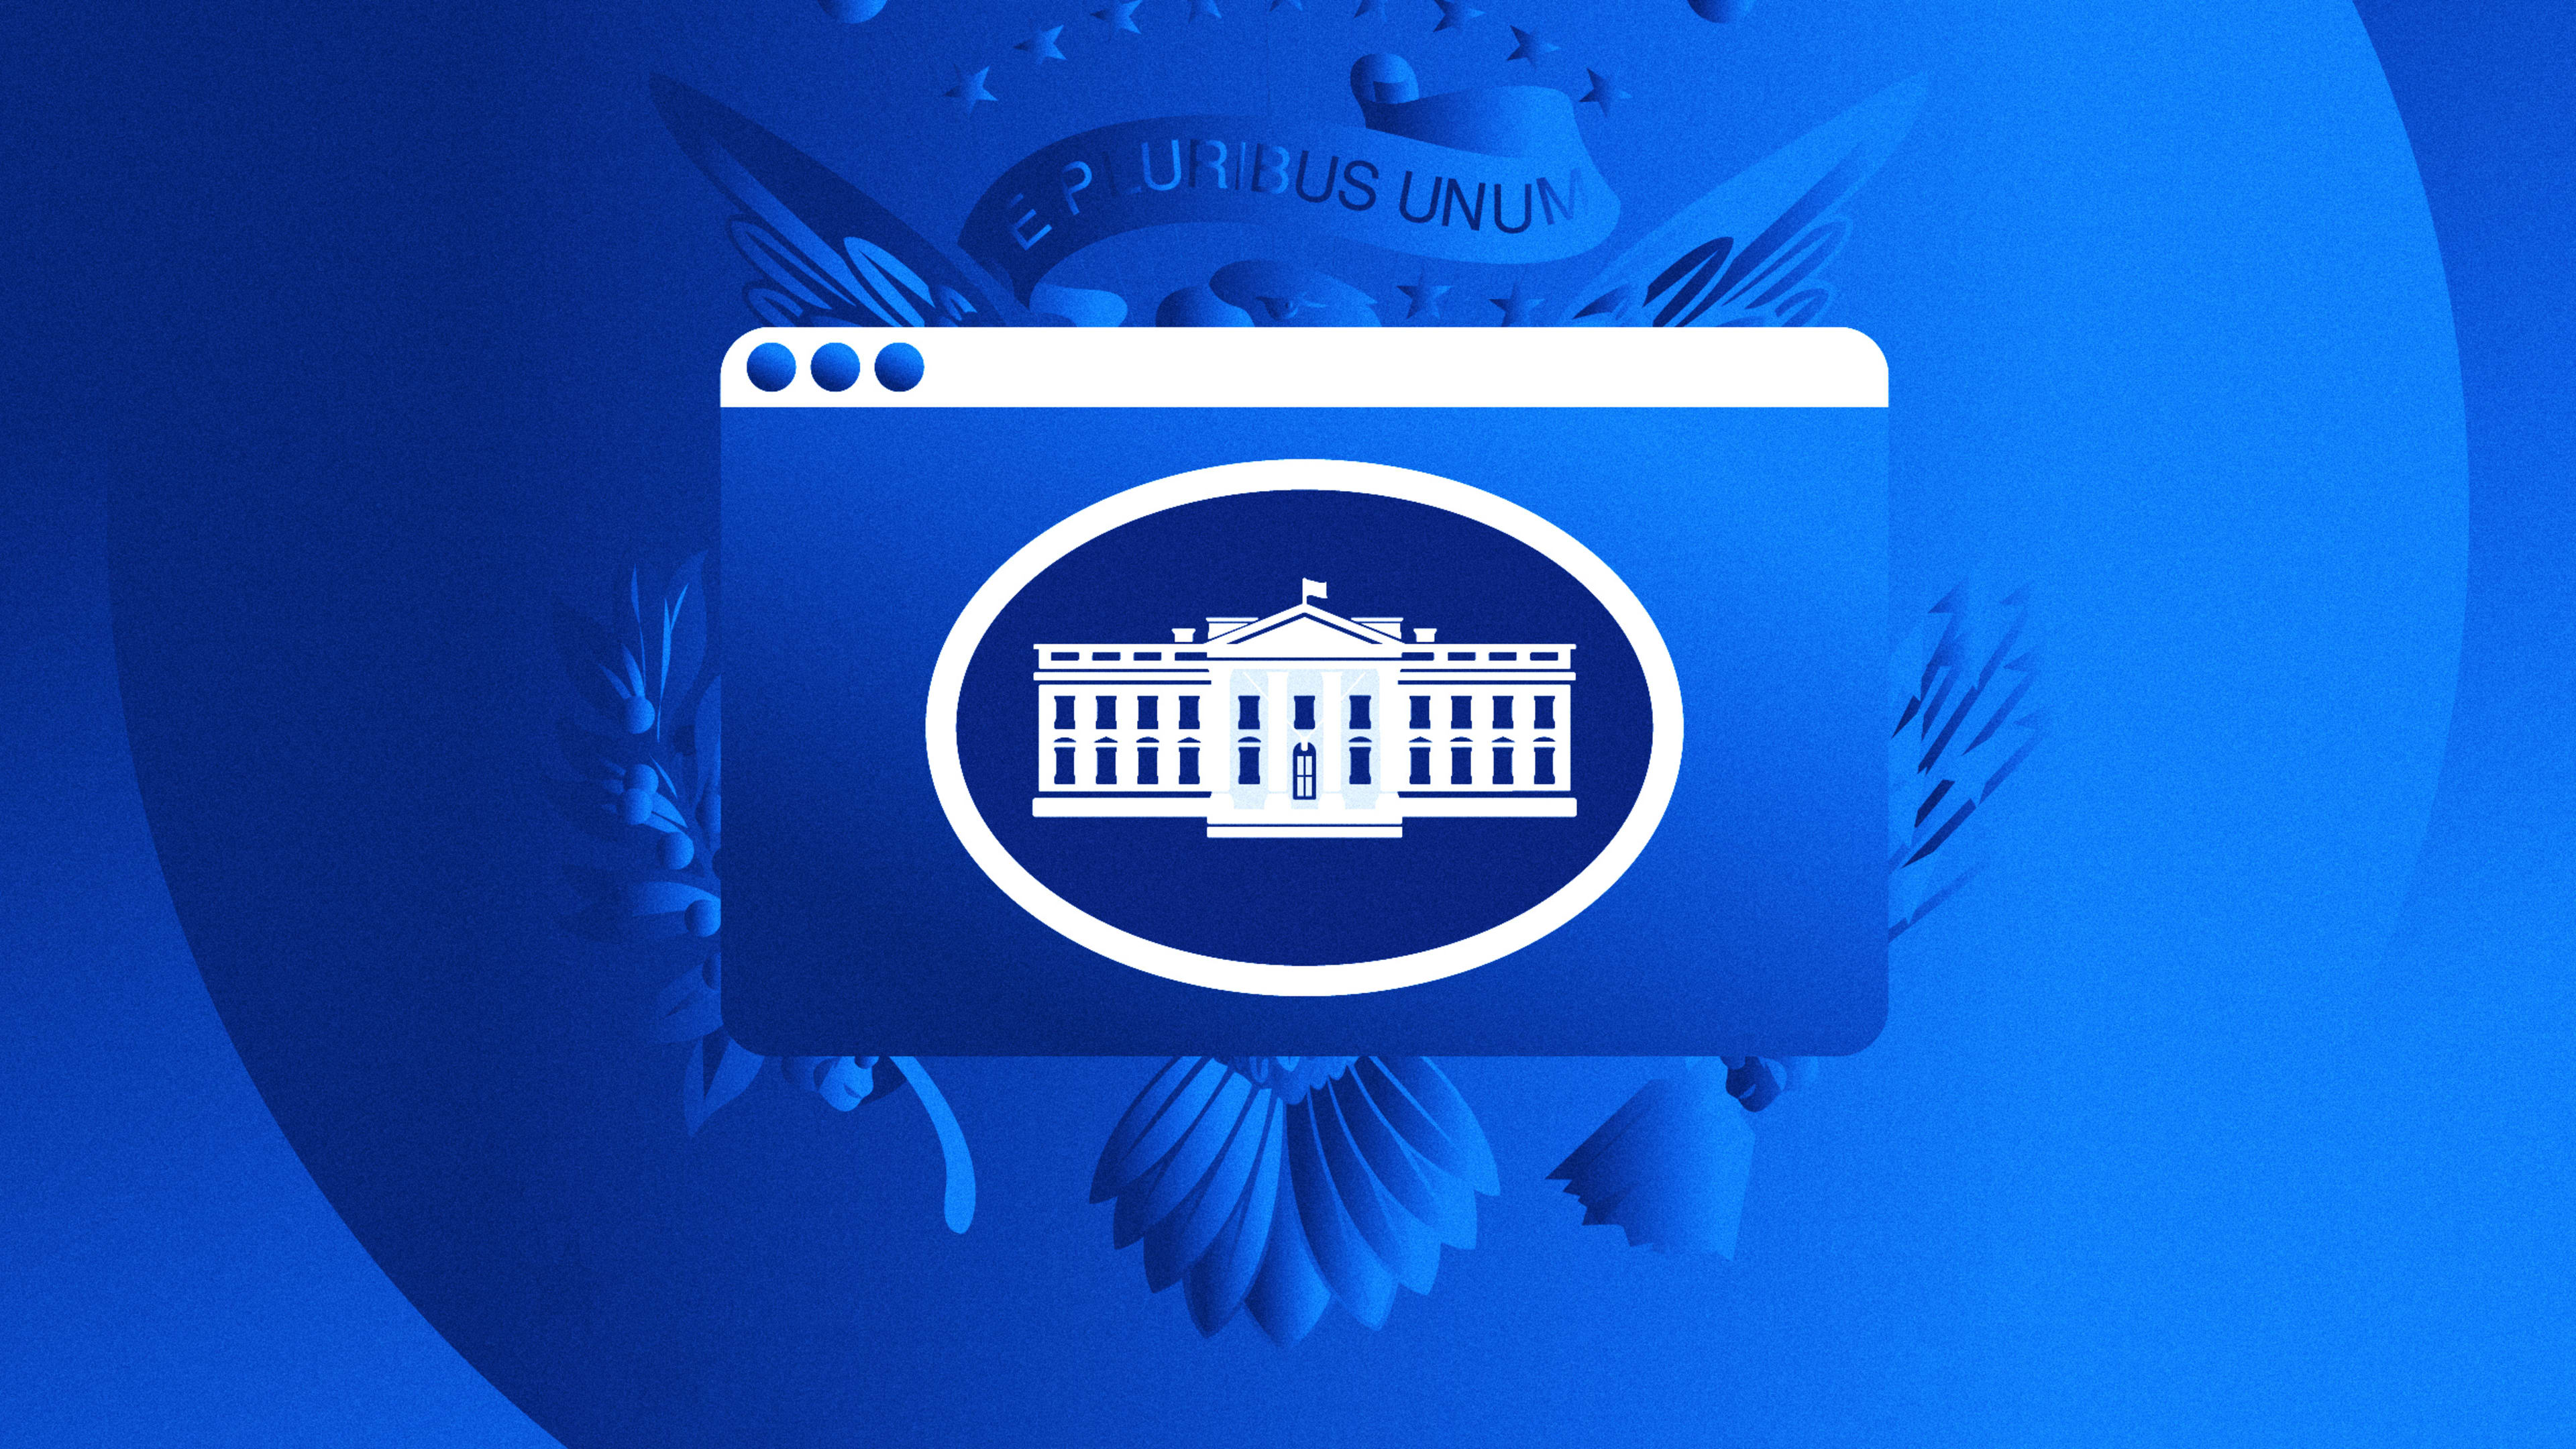 Even the White House logo got a makeover. See what changed